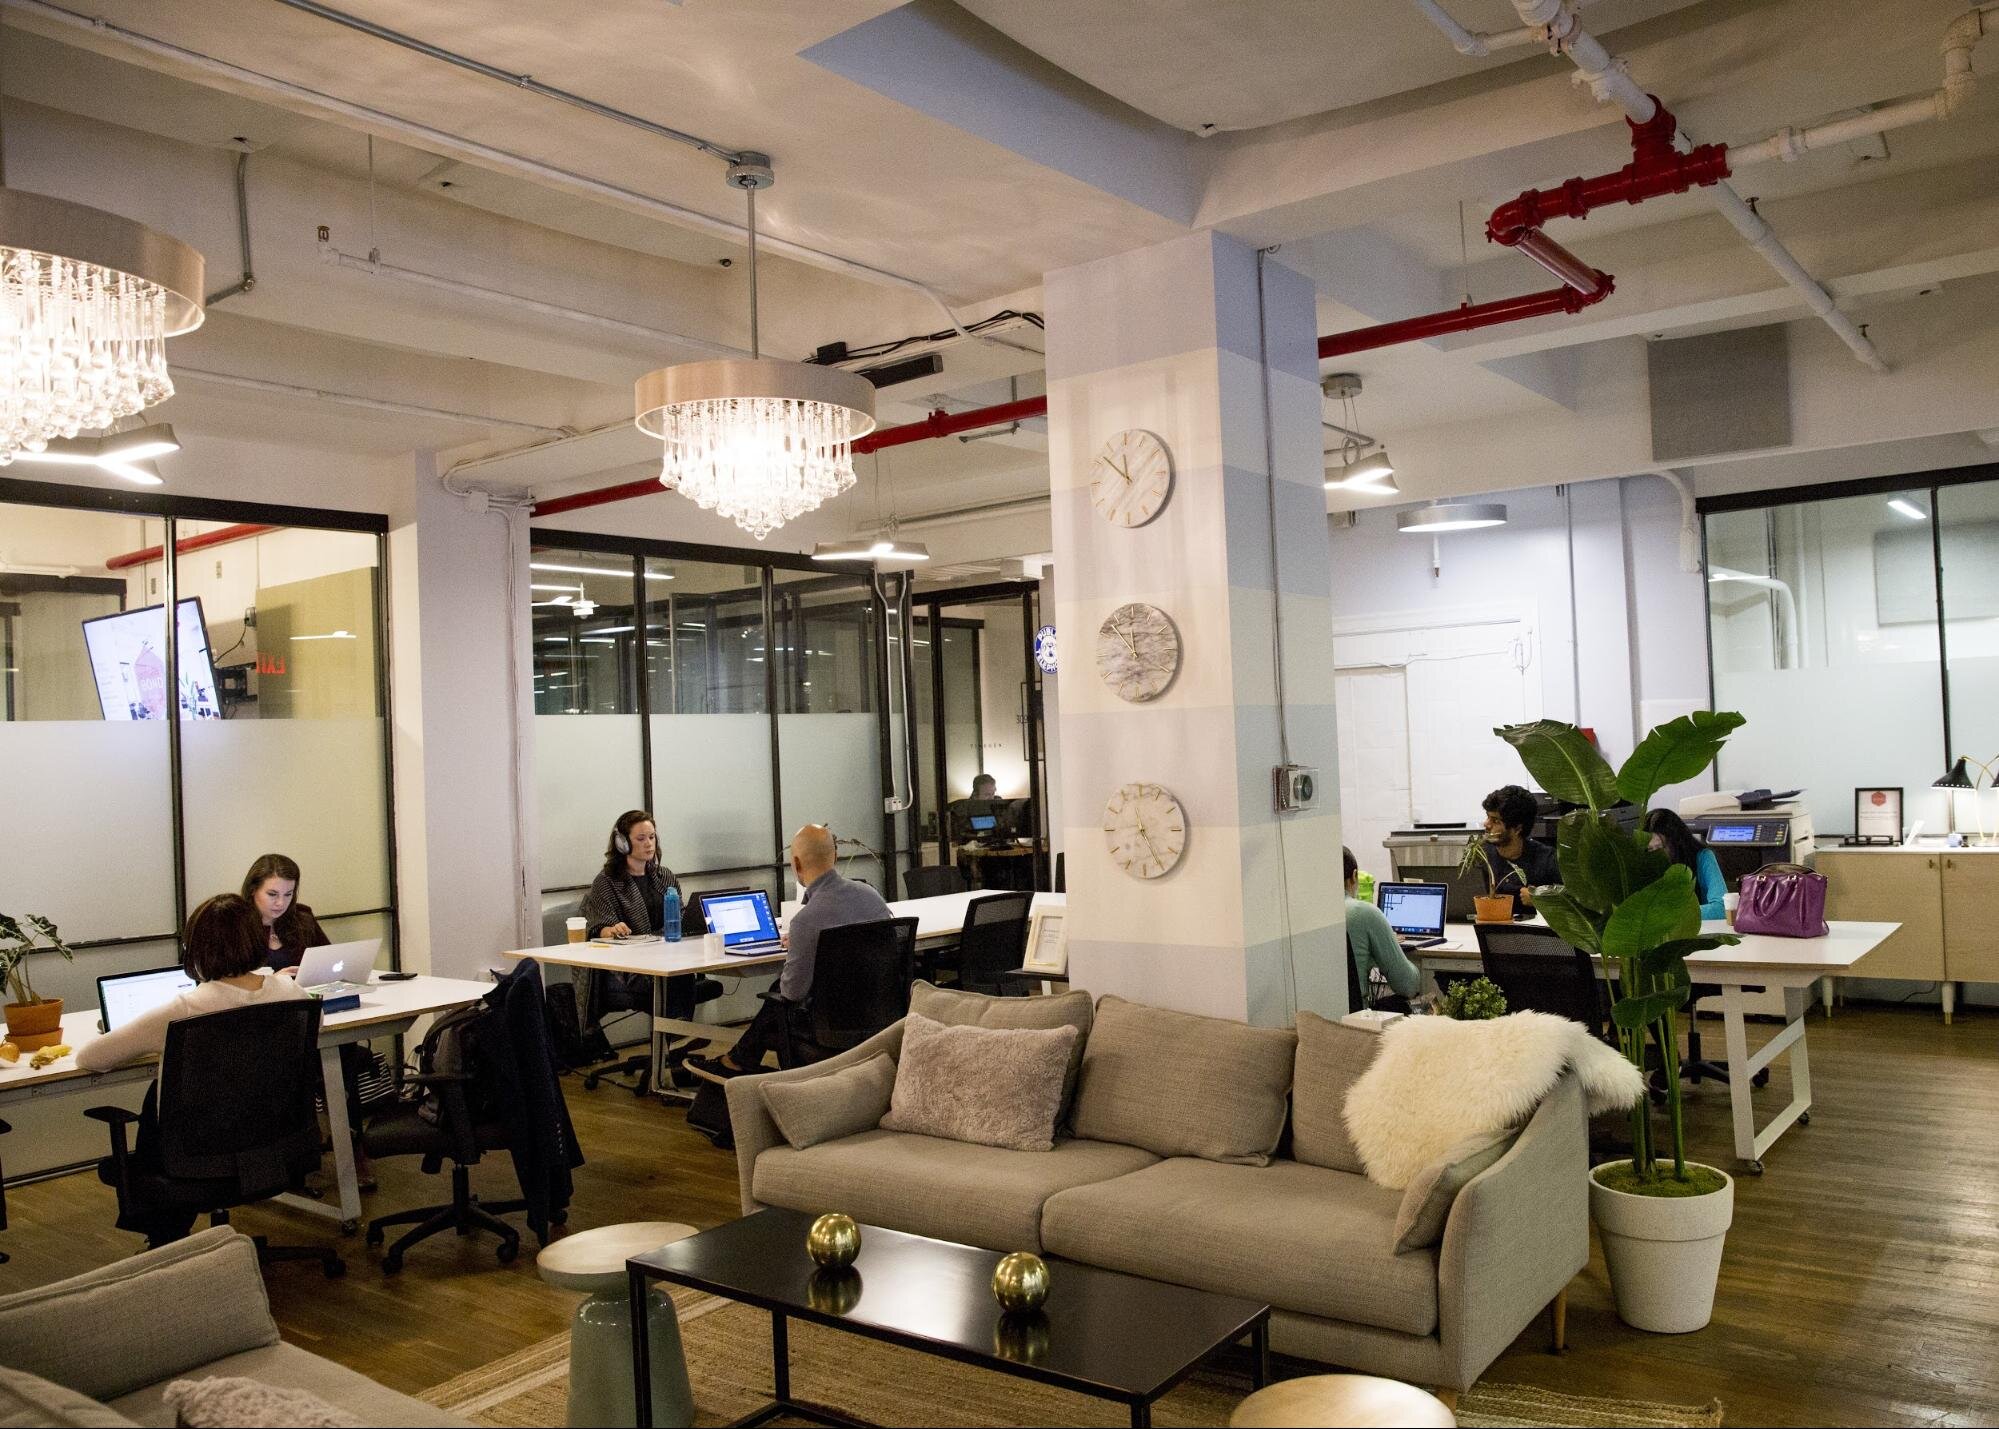 Shared desks, sofas, and tables in a gorgeous office